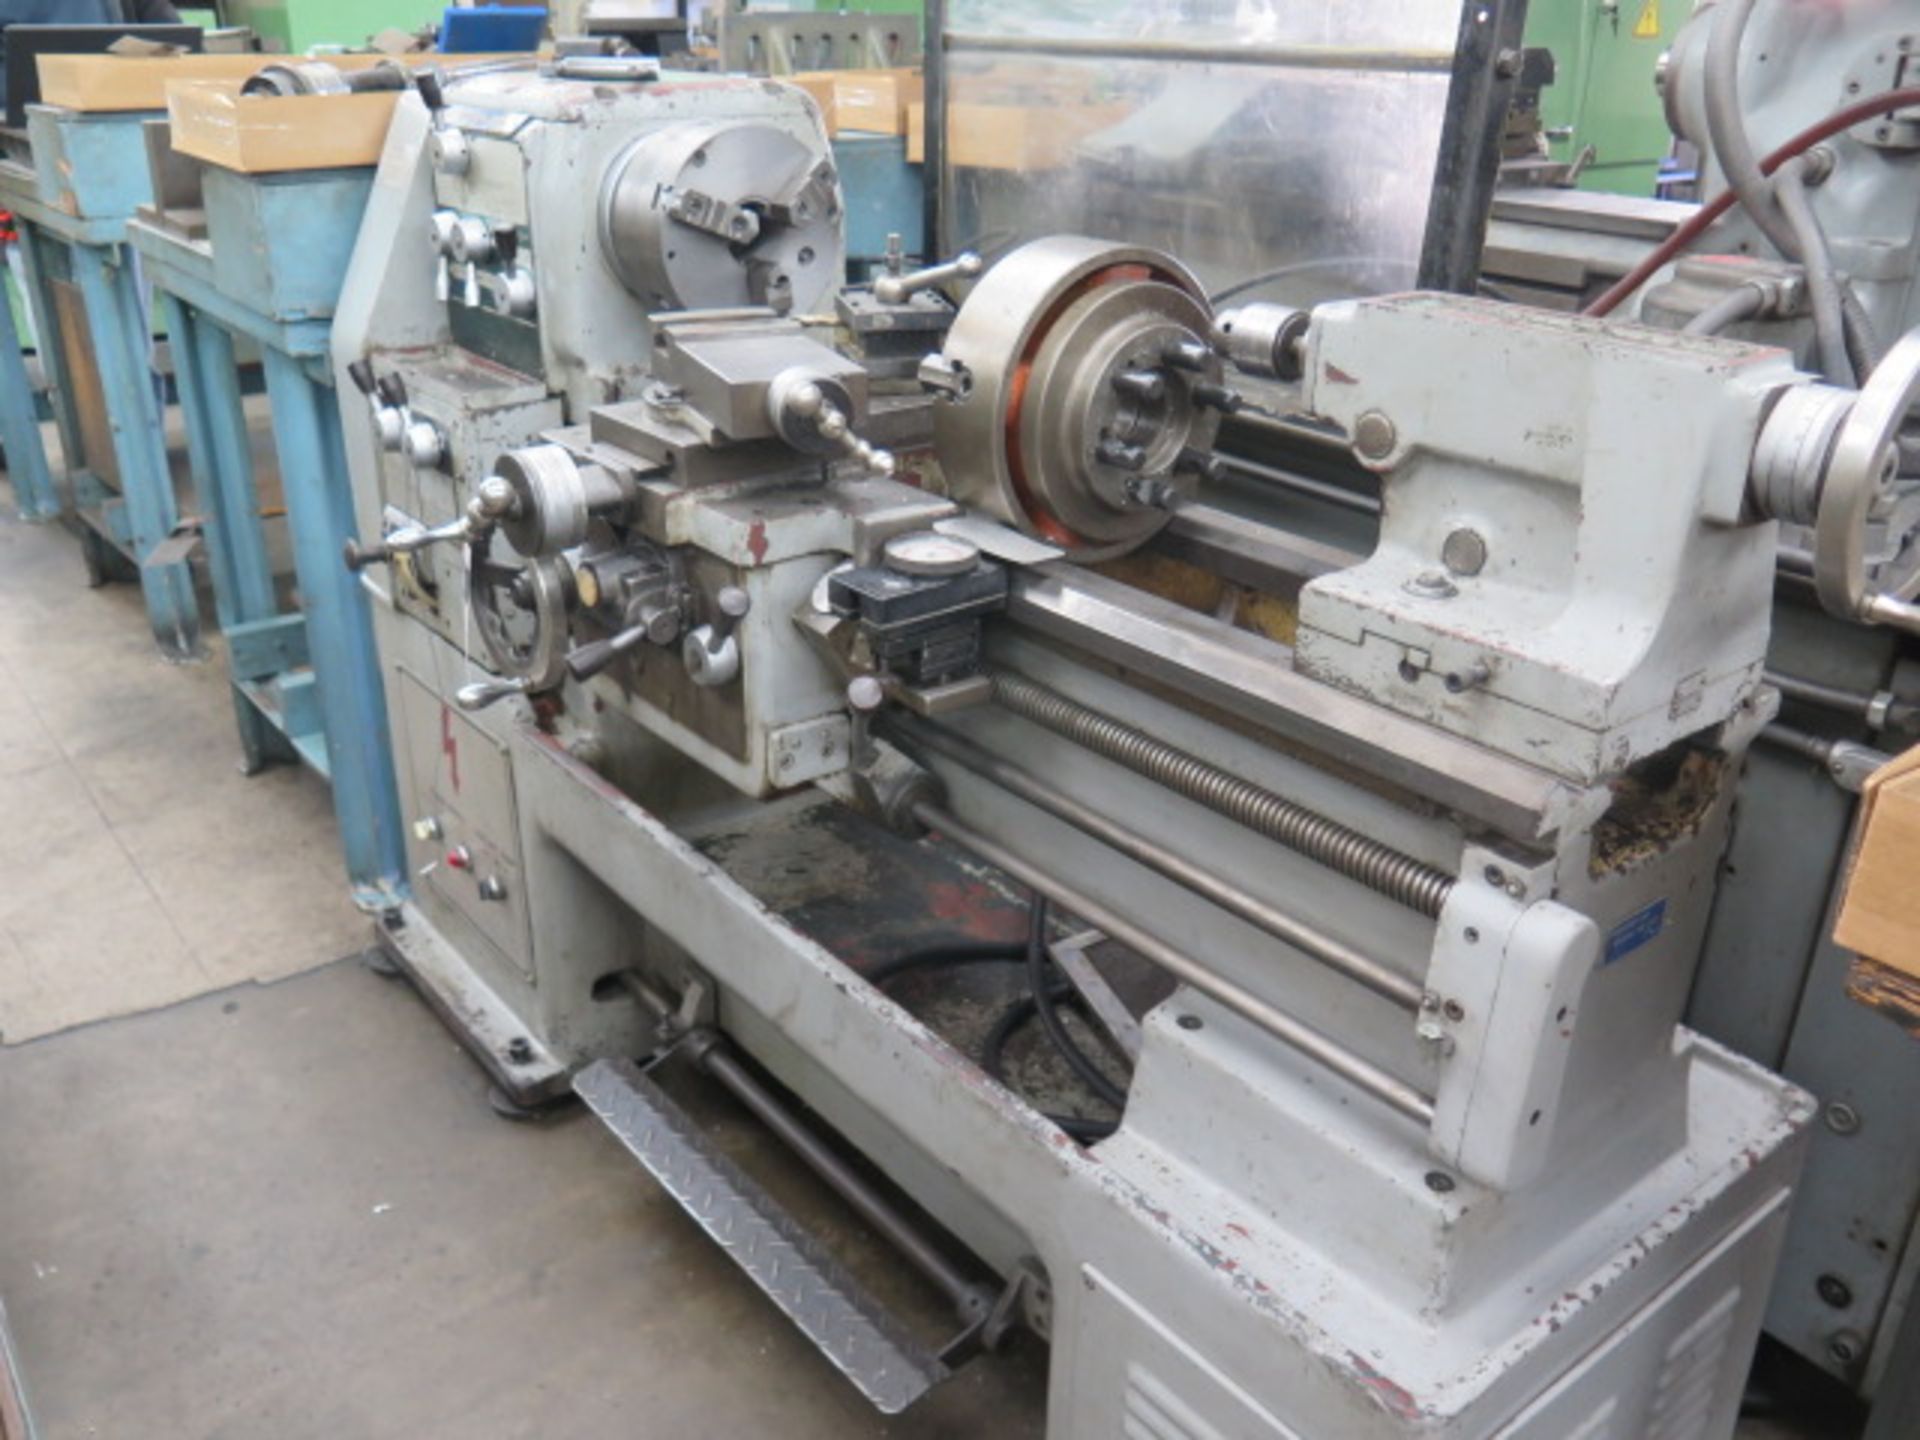 Sharp 1528 15” x 28” Geared Head Gap Bed Lathe s/n 922 w/ 83-1800 RPM, Inch/mm Threading, SOLD AS IS - Image 2 of 12